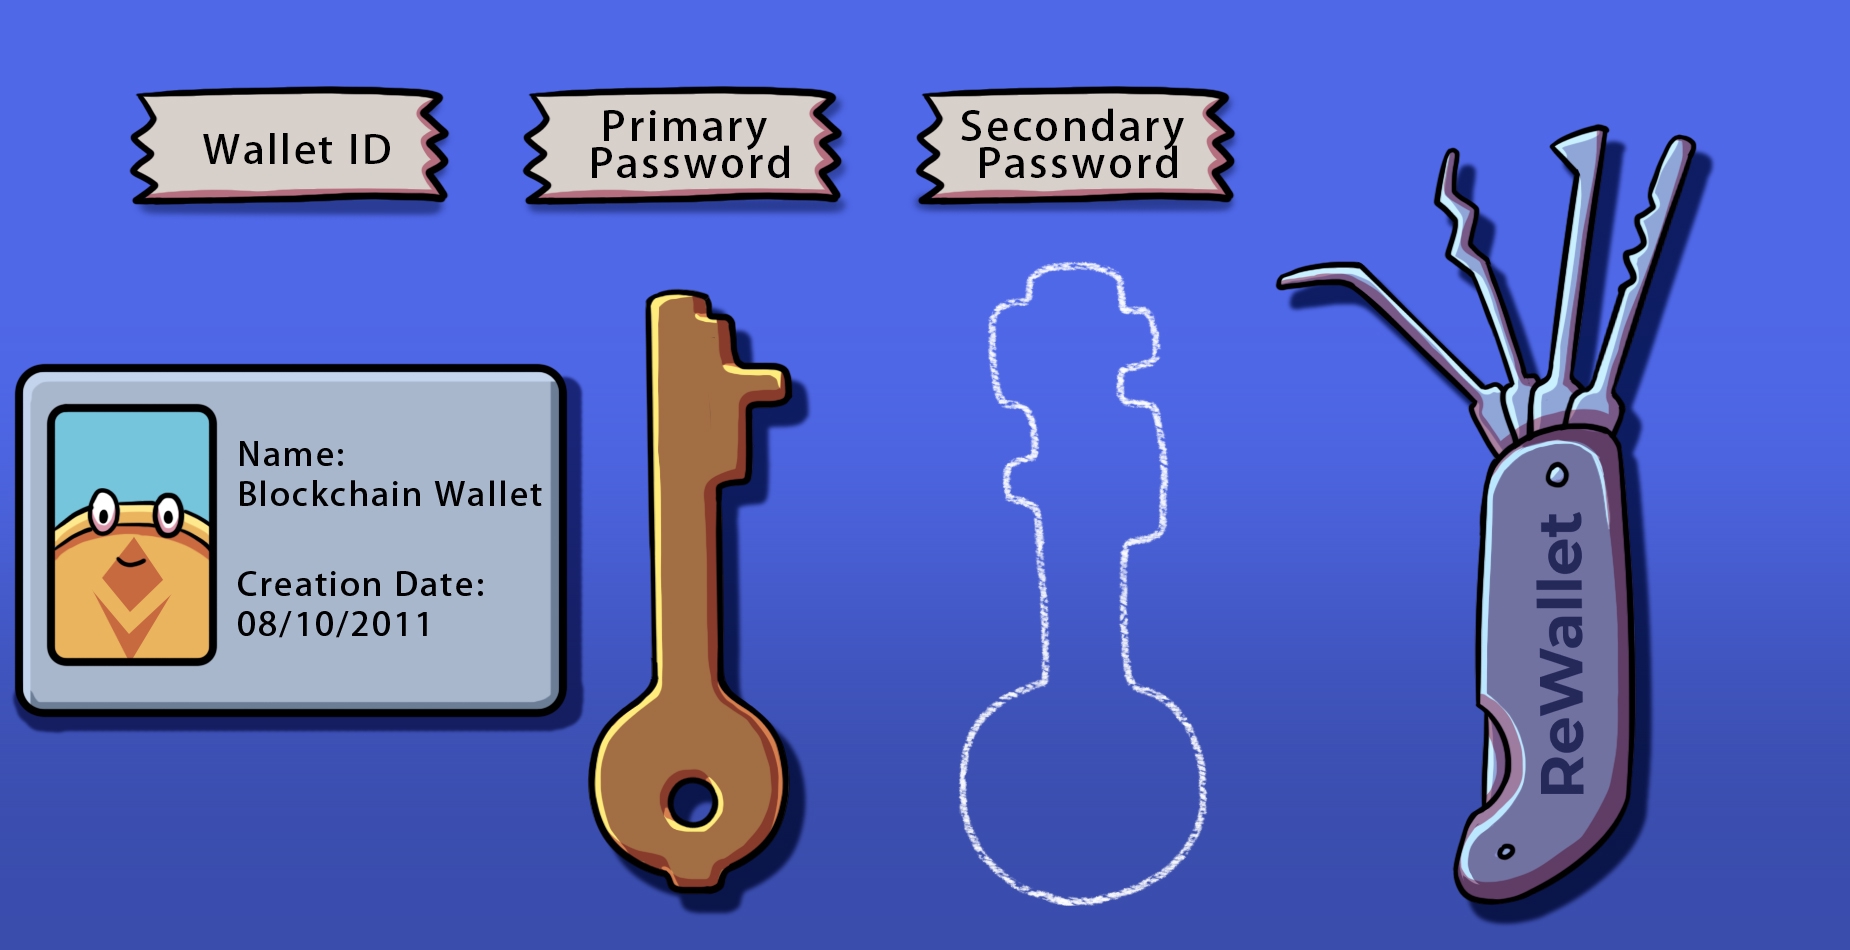 WalletID, primary password and a missing key representing the lost blockchain secondary password.